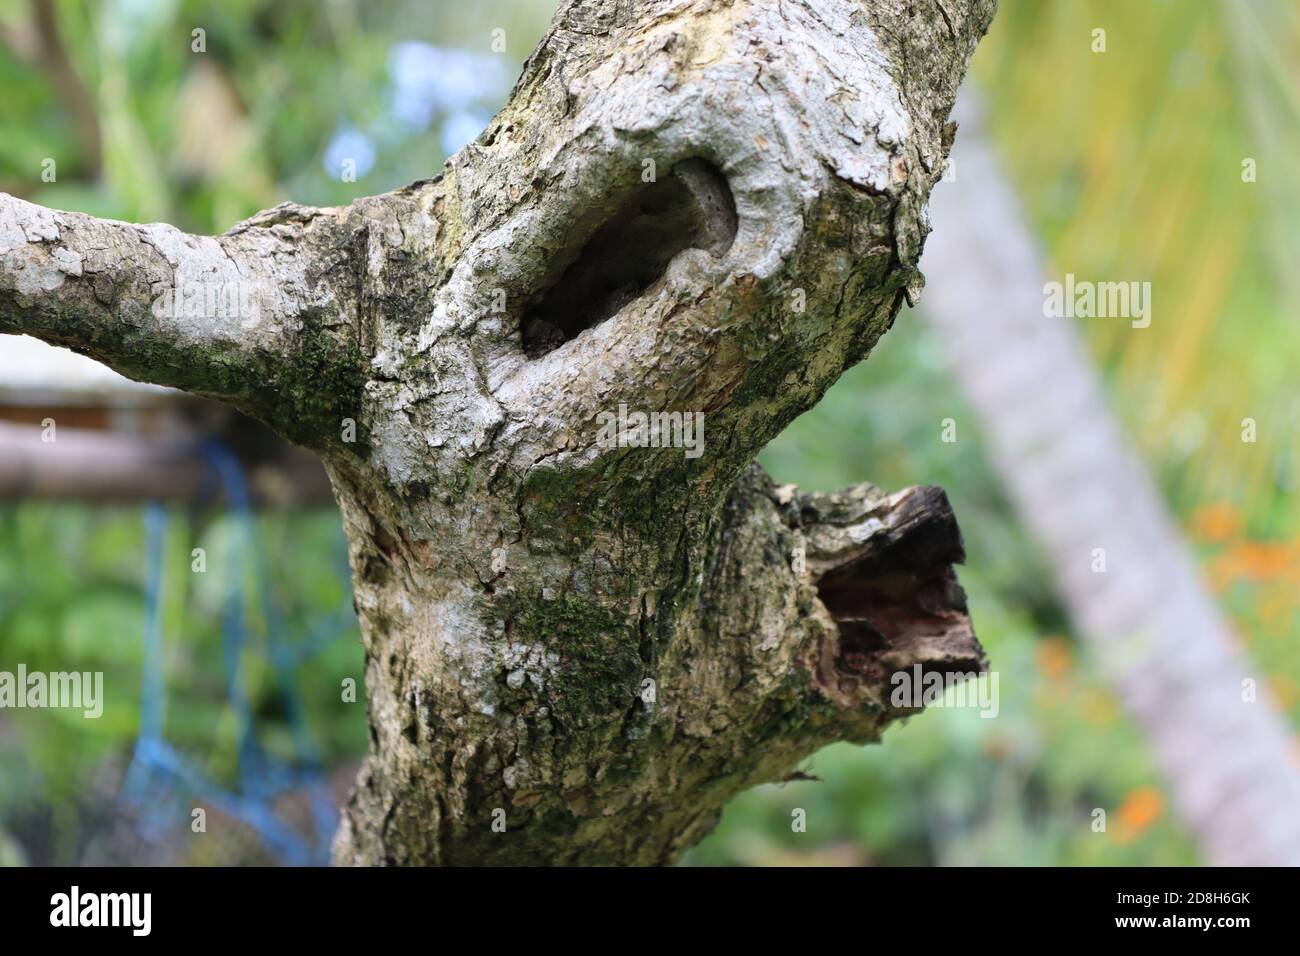 This trunk of the tree has damaged hardly but the tree is still strong. Stock Photo